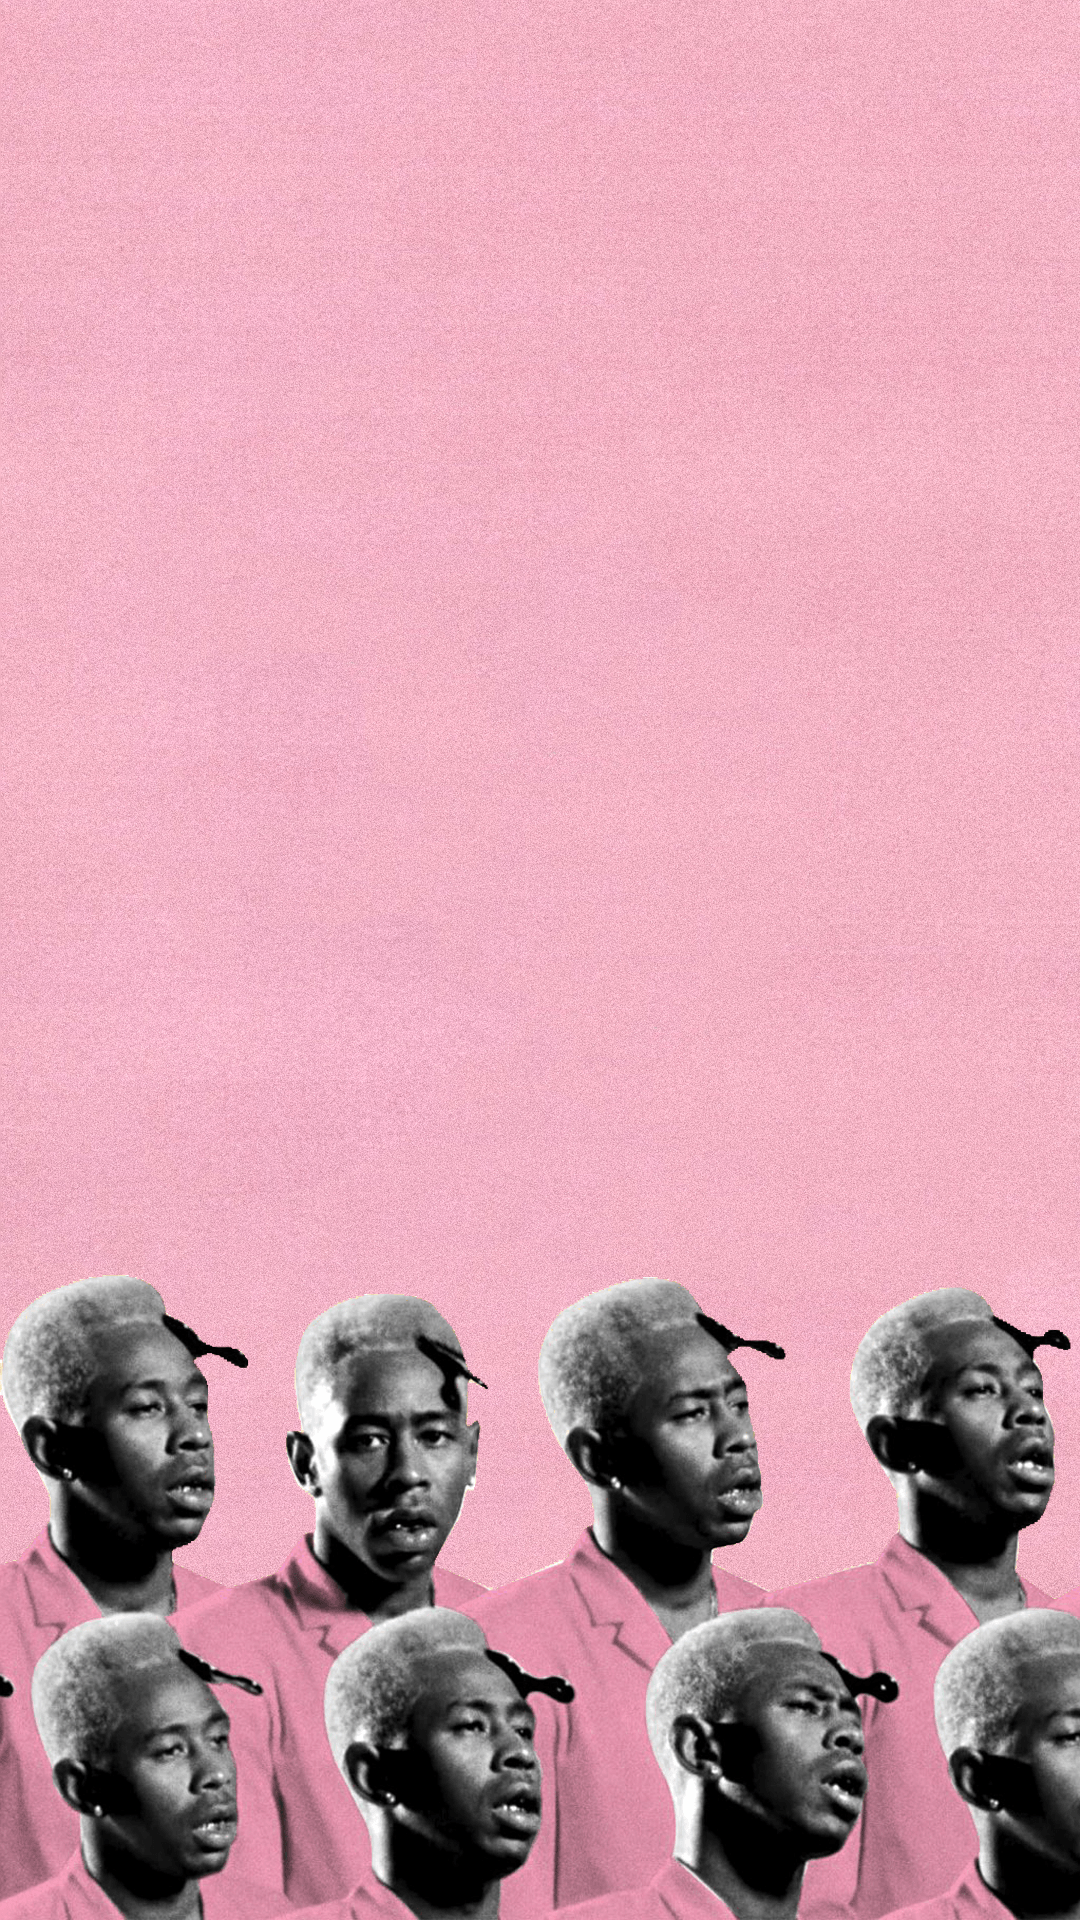 IGOR Themed Wallpaper (FULL HD in comments)